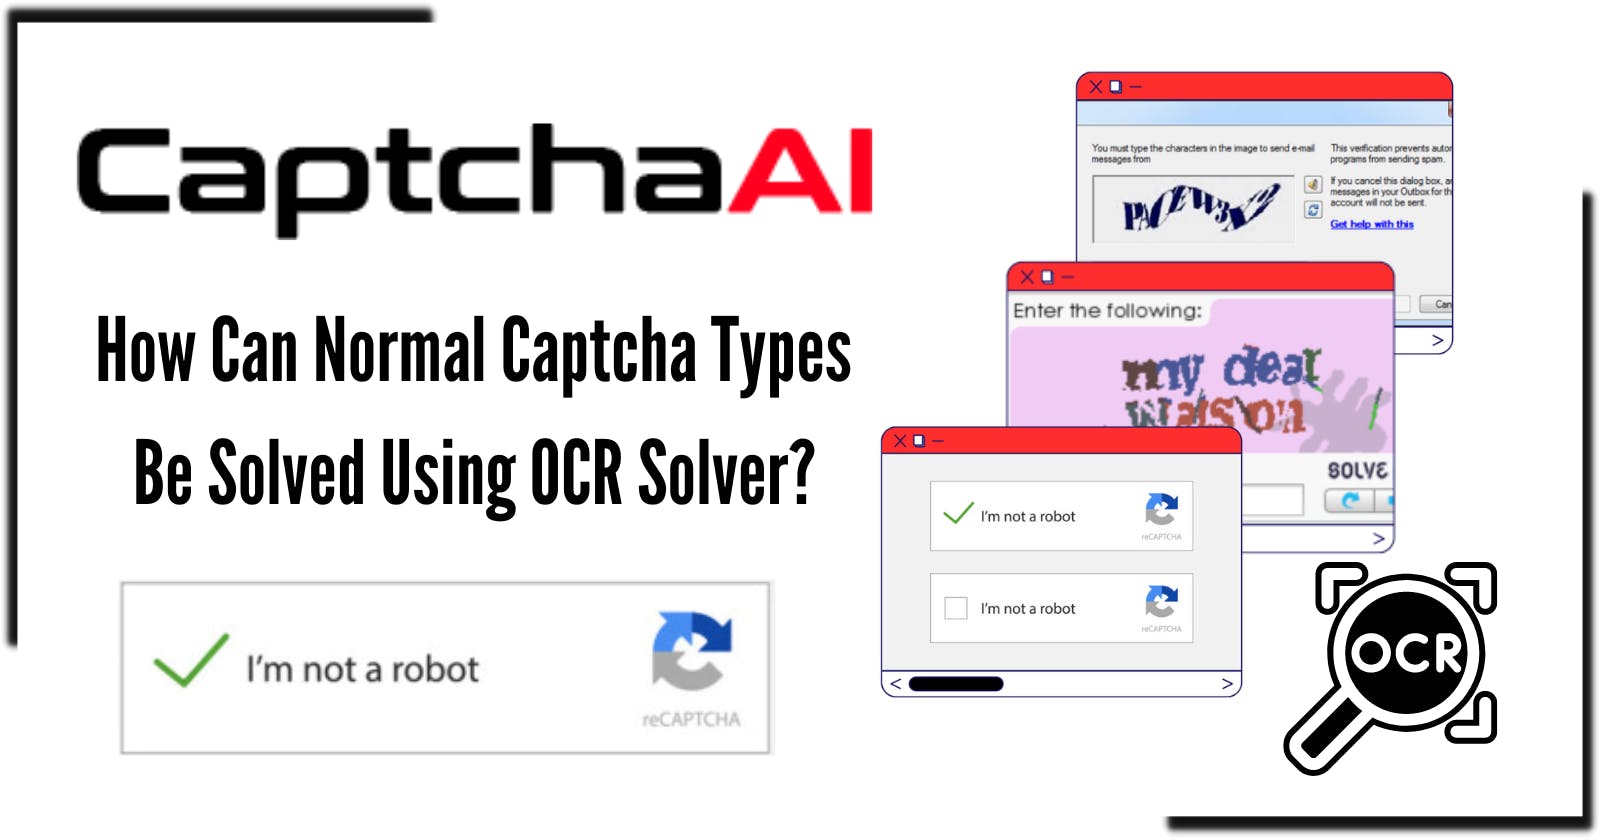 How Can Normal Captcha Types Be Solved Using OCR Solver?